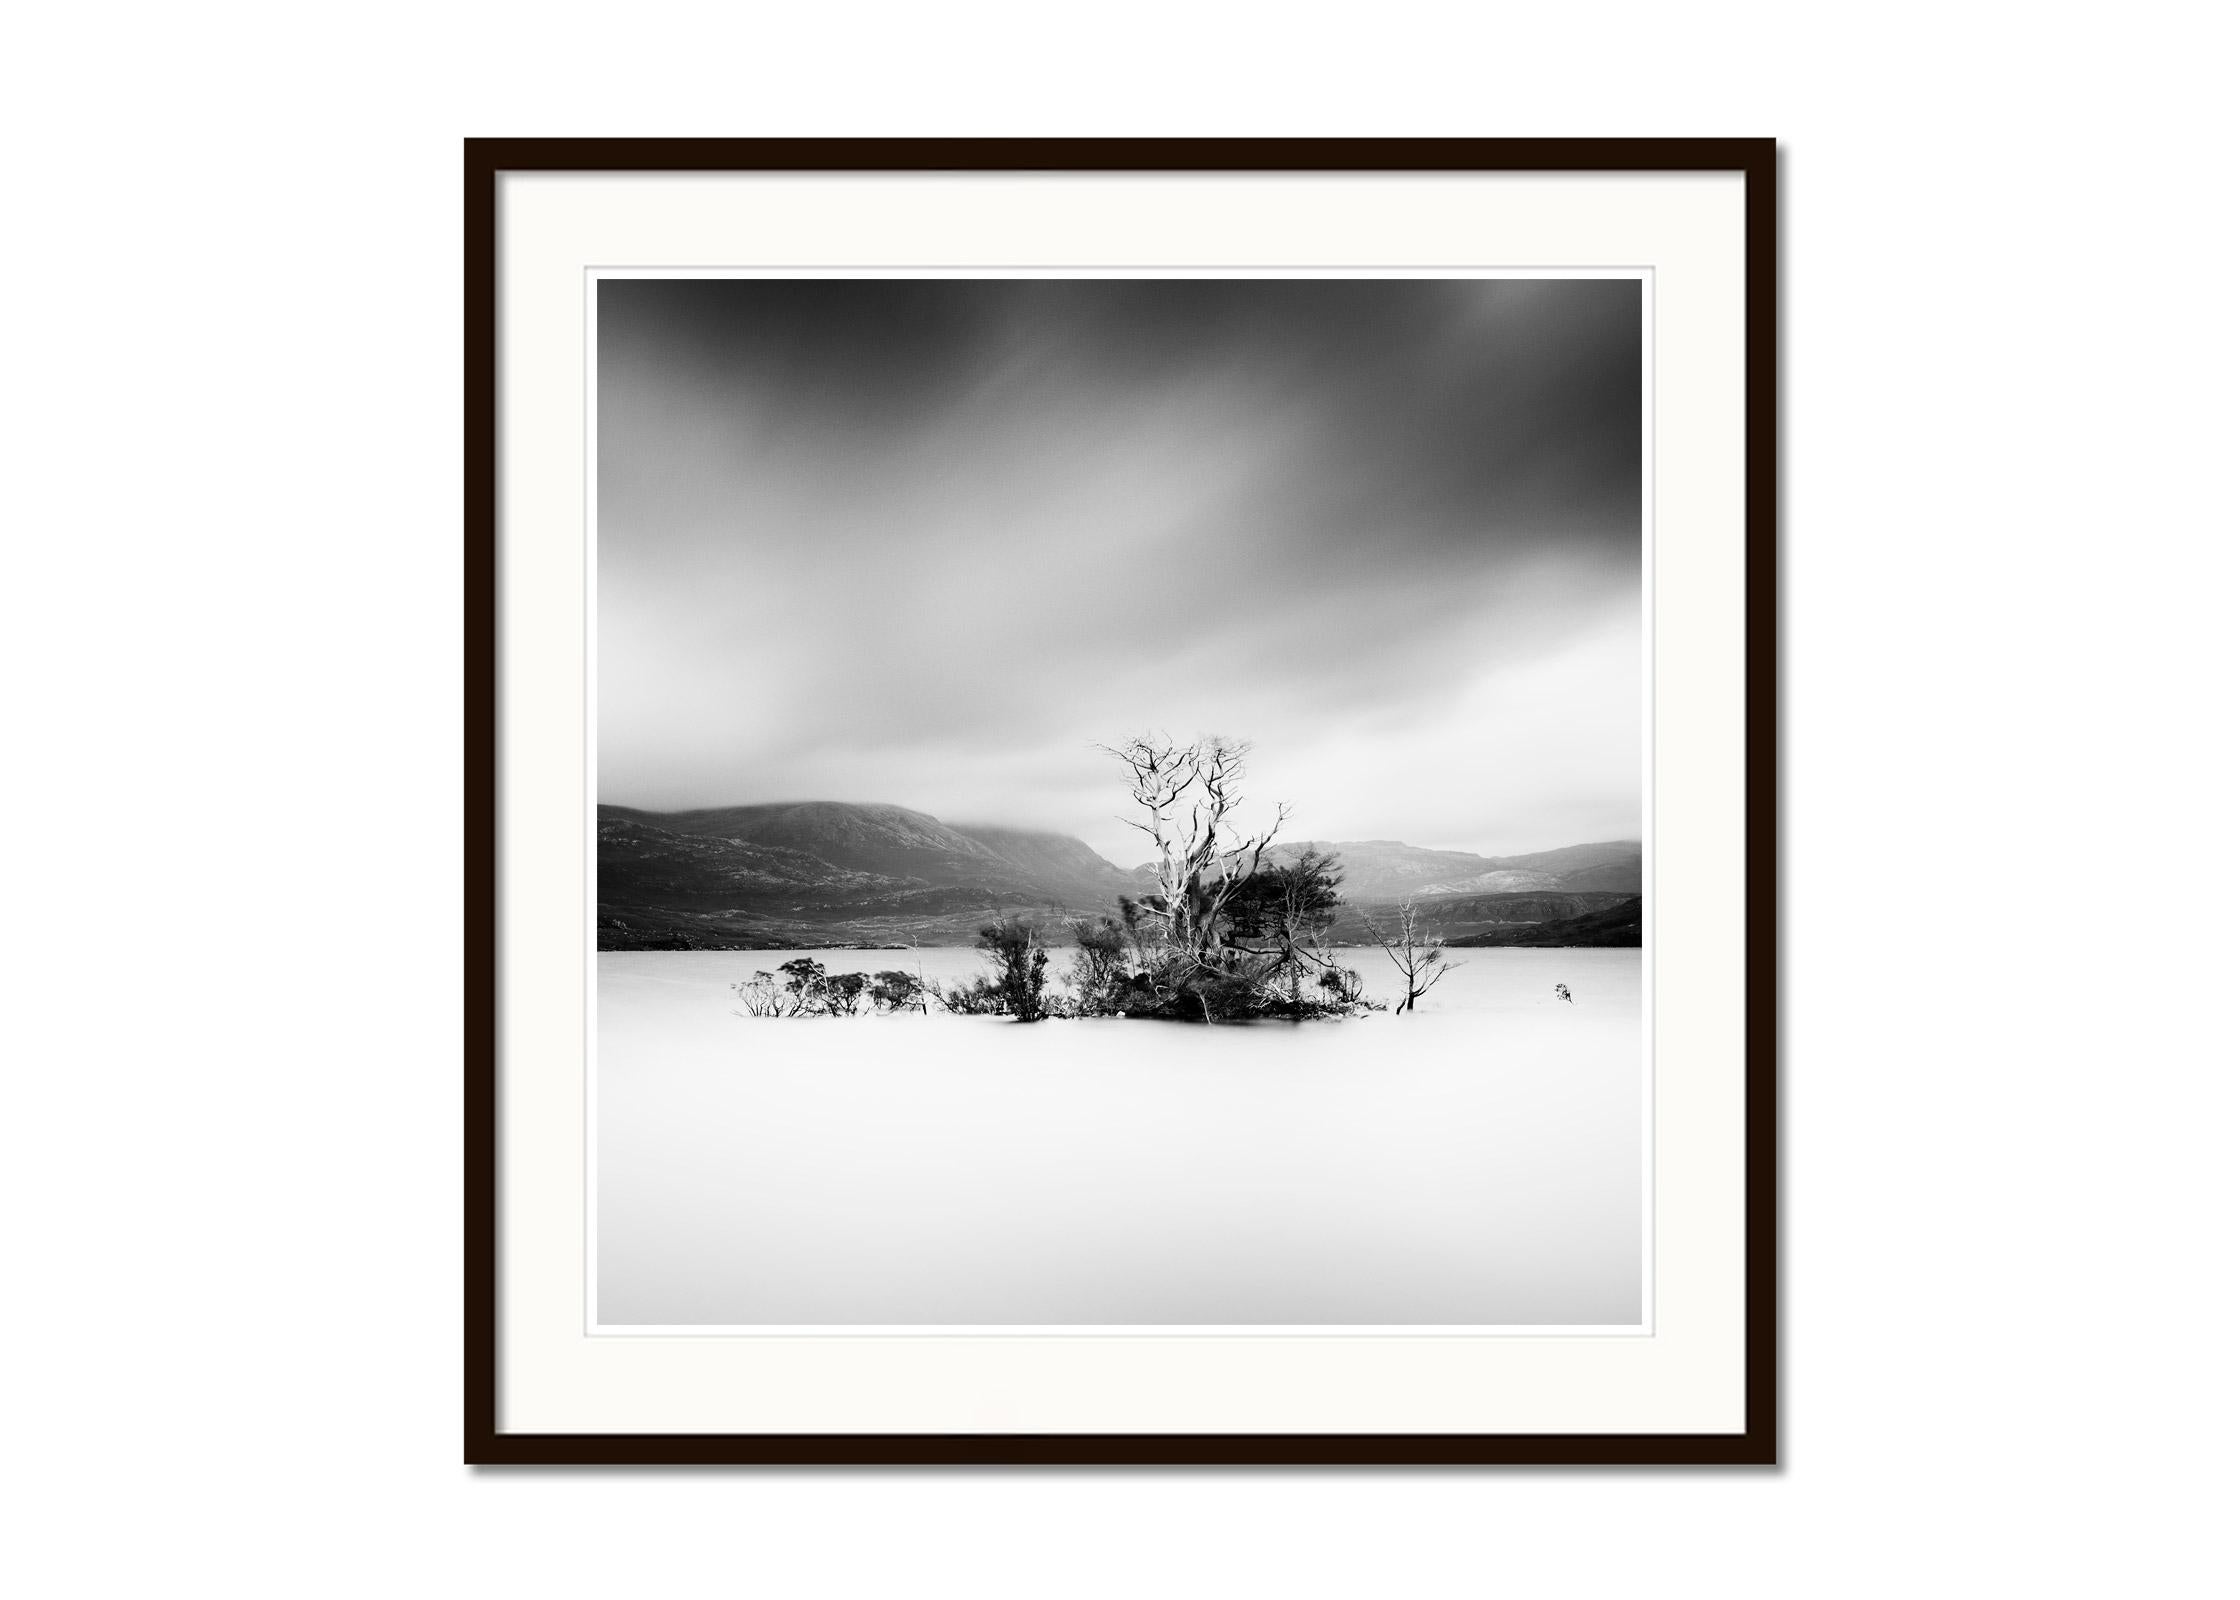 Drowned Island, sunken trees, Scotland, black & white long exposure photography  - Contemporary Photograph by Gerald Berghammer